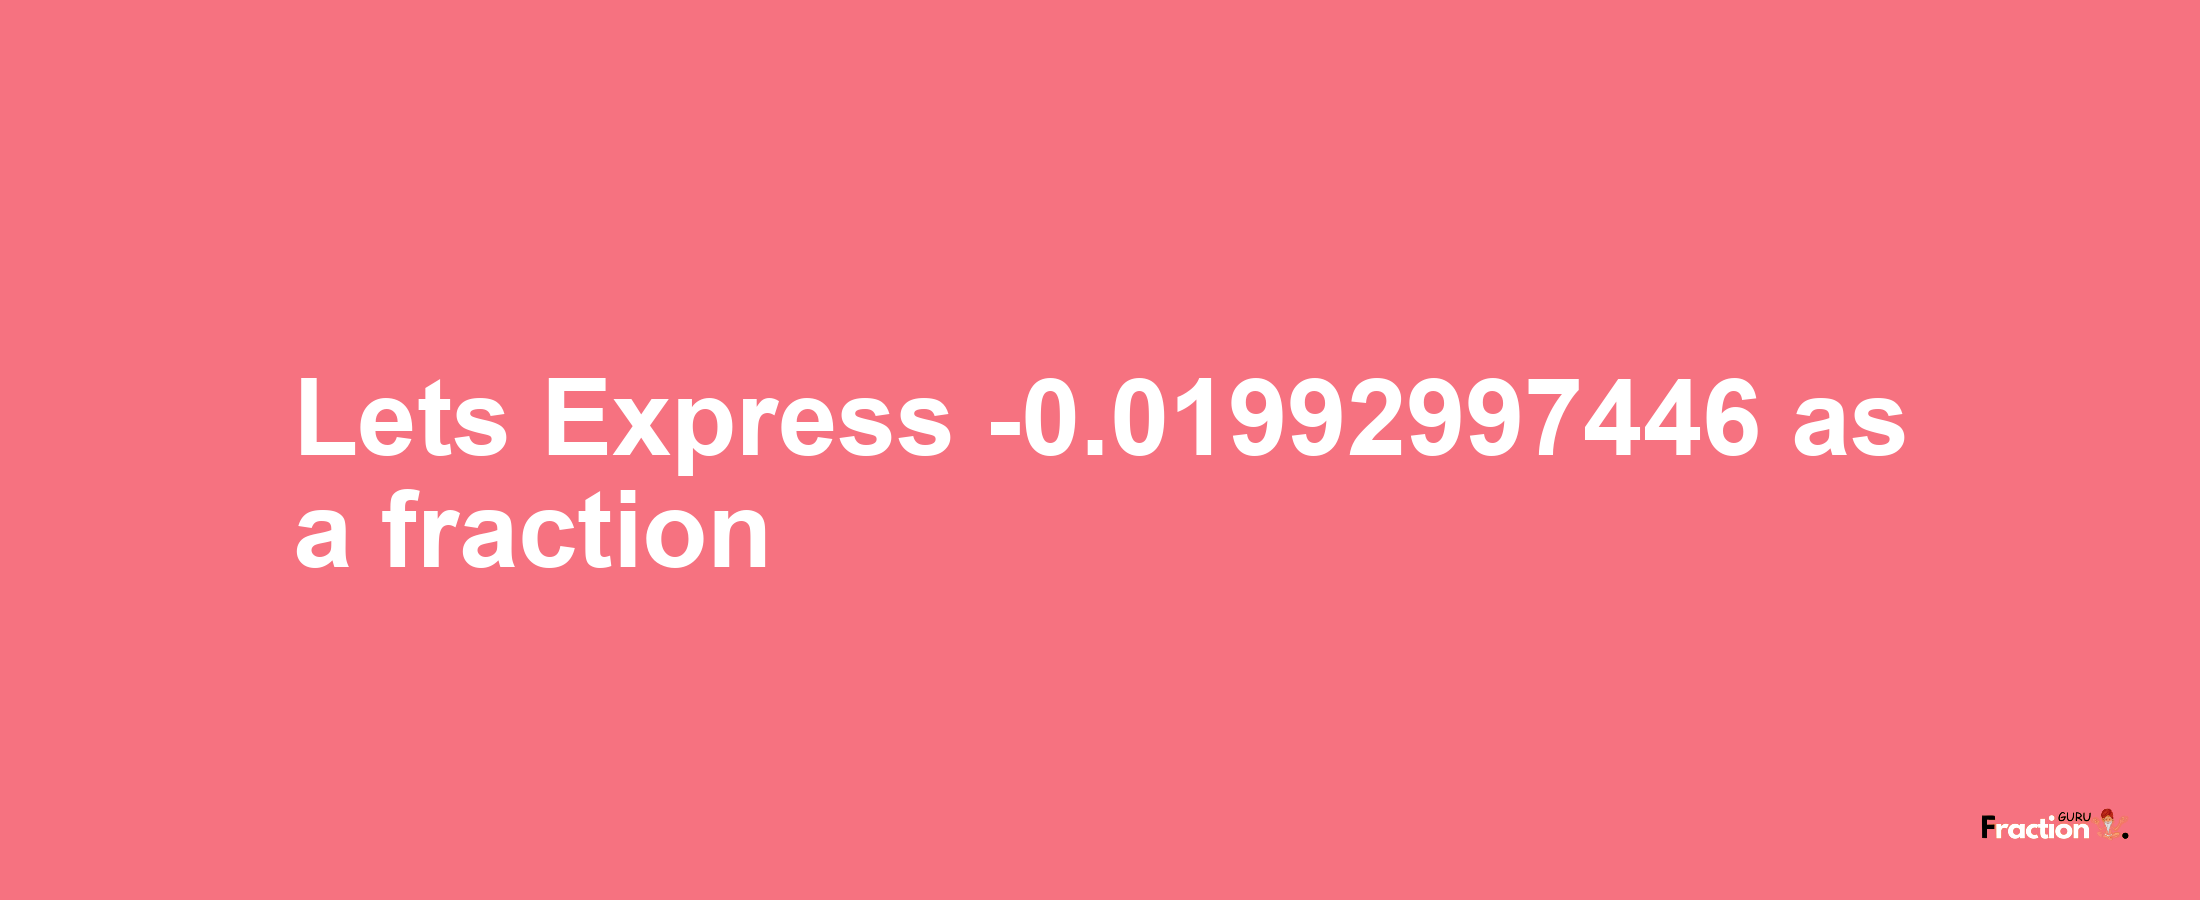 Lets Express -0.01992997446 as afraction